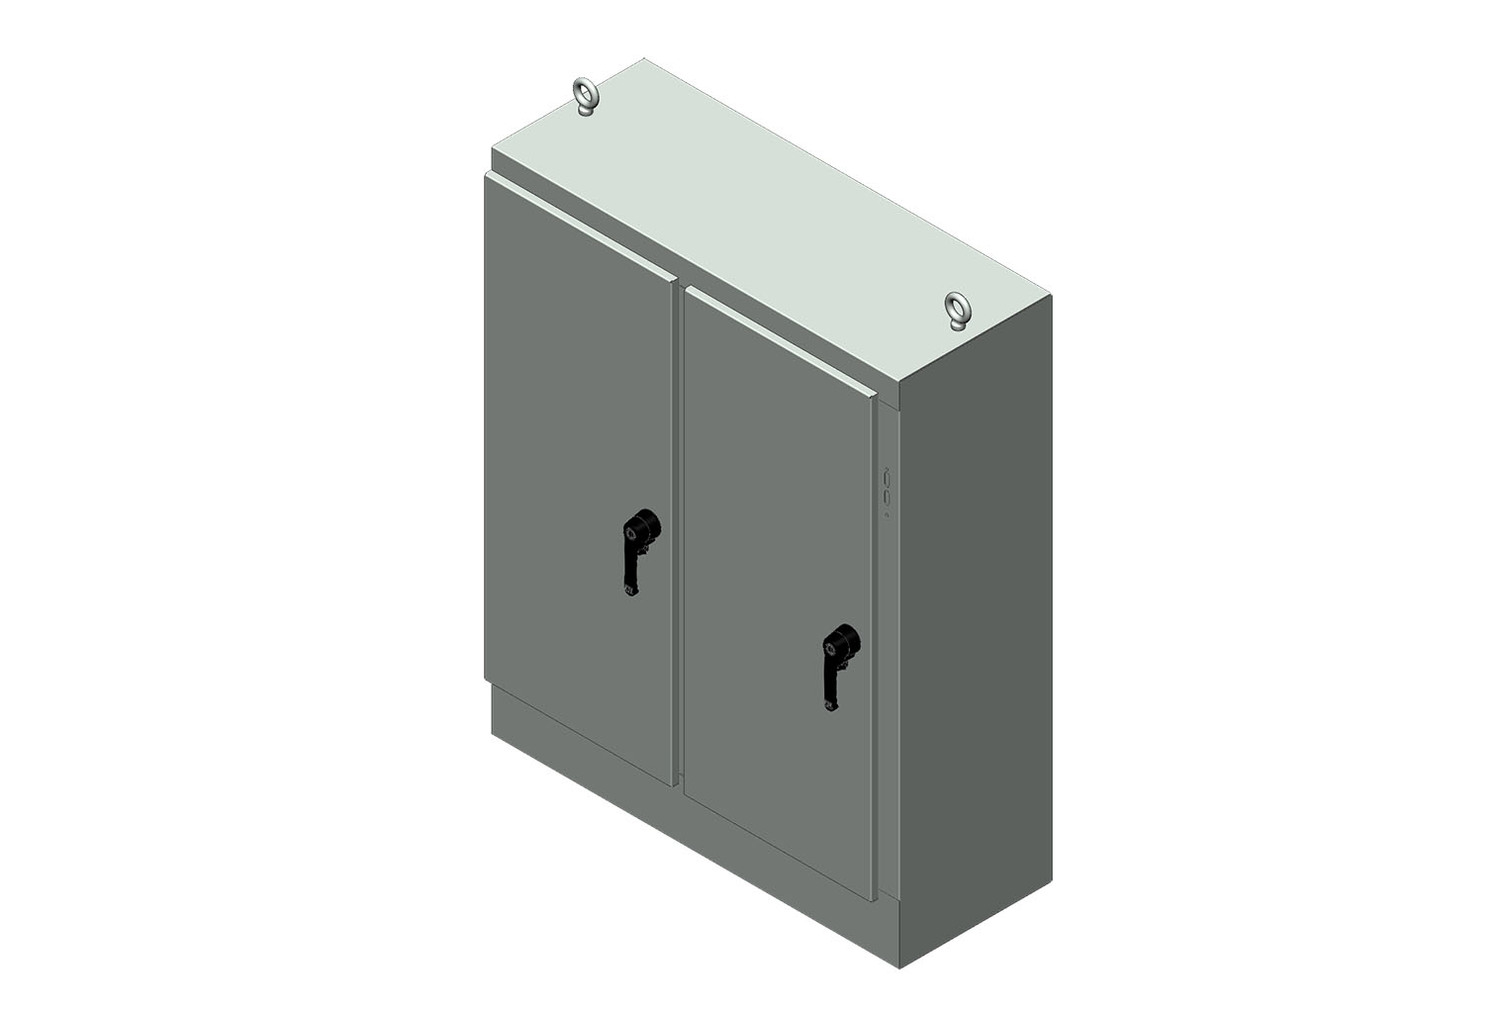 RMR Free-Standing Disconnect Enclosure, Type 4, with Solid Double Door - Image 5